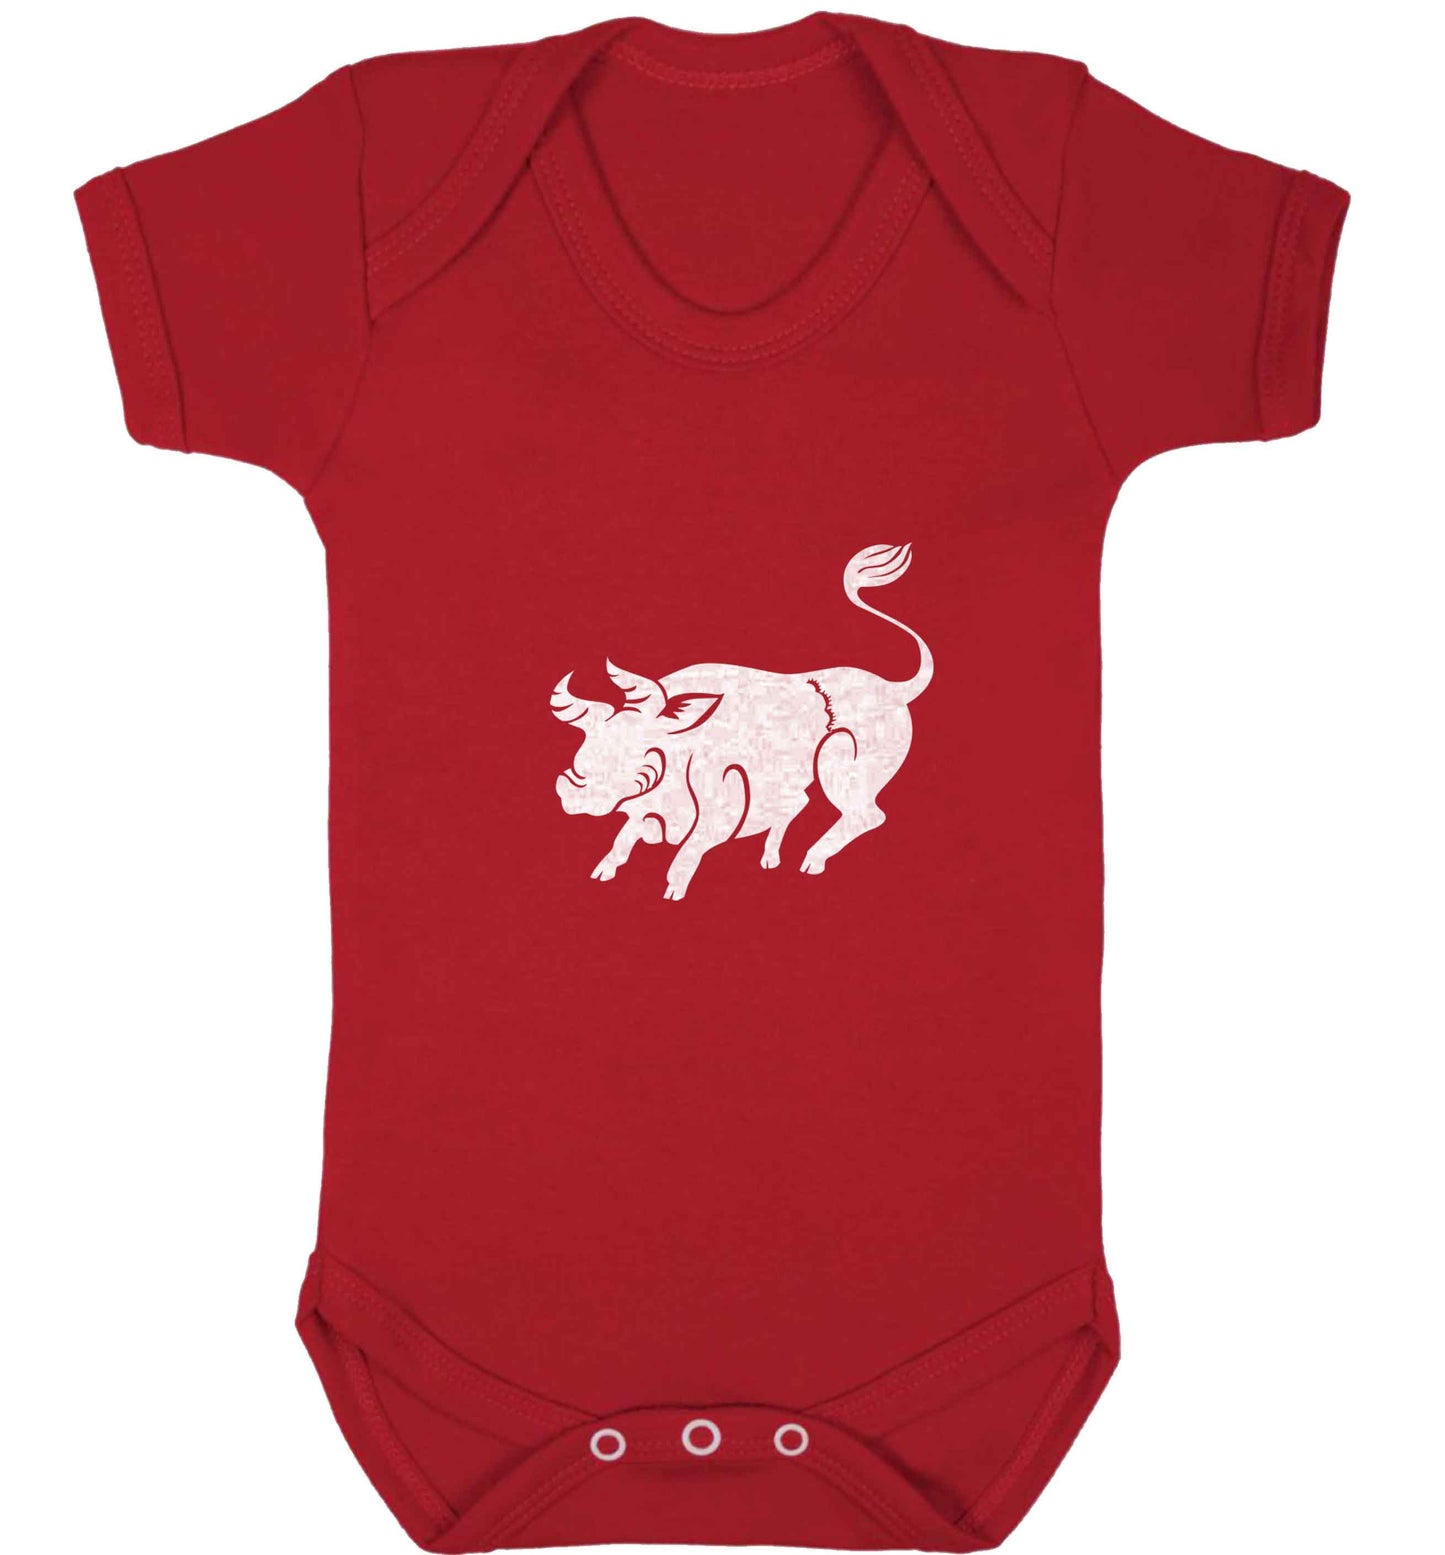 Blue ox baby vest red 18-24 months